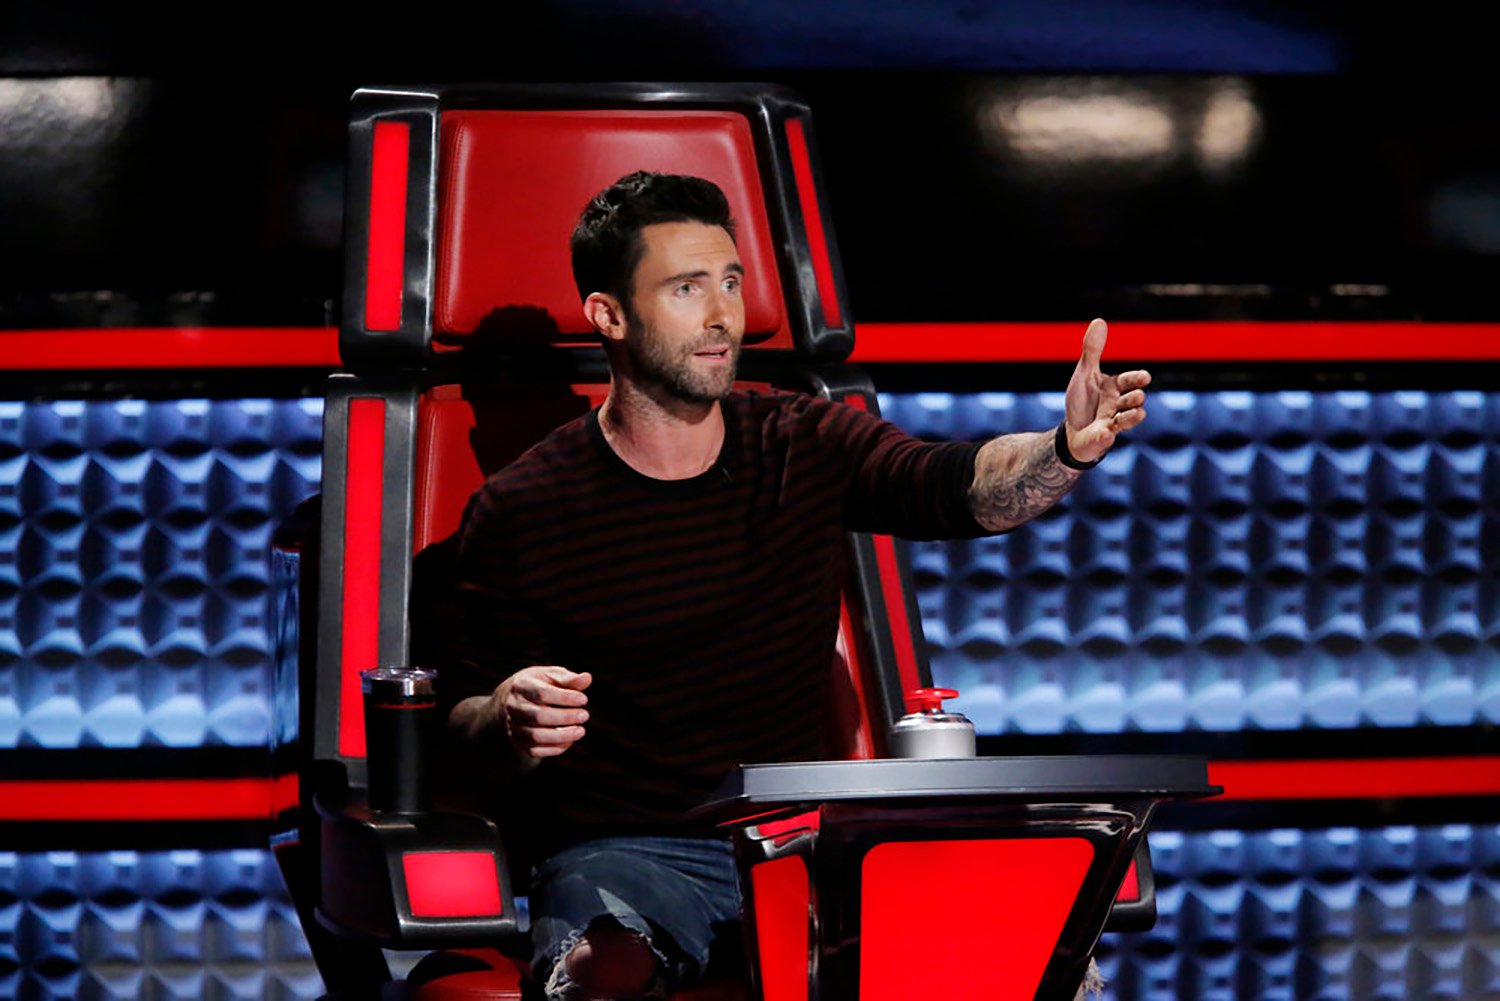 Adam Levine, a coach on The Voice who became involved in a few scandals, appears on the show in 2016.